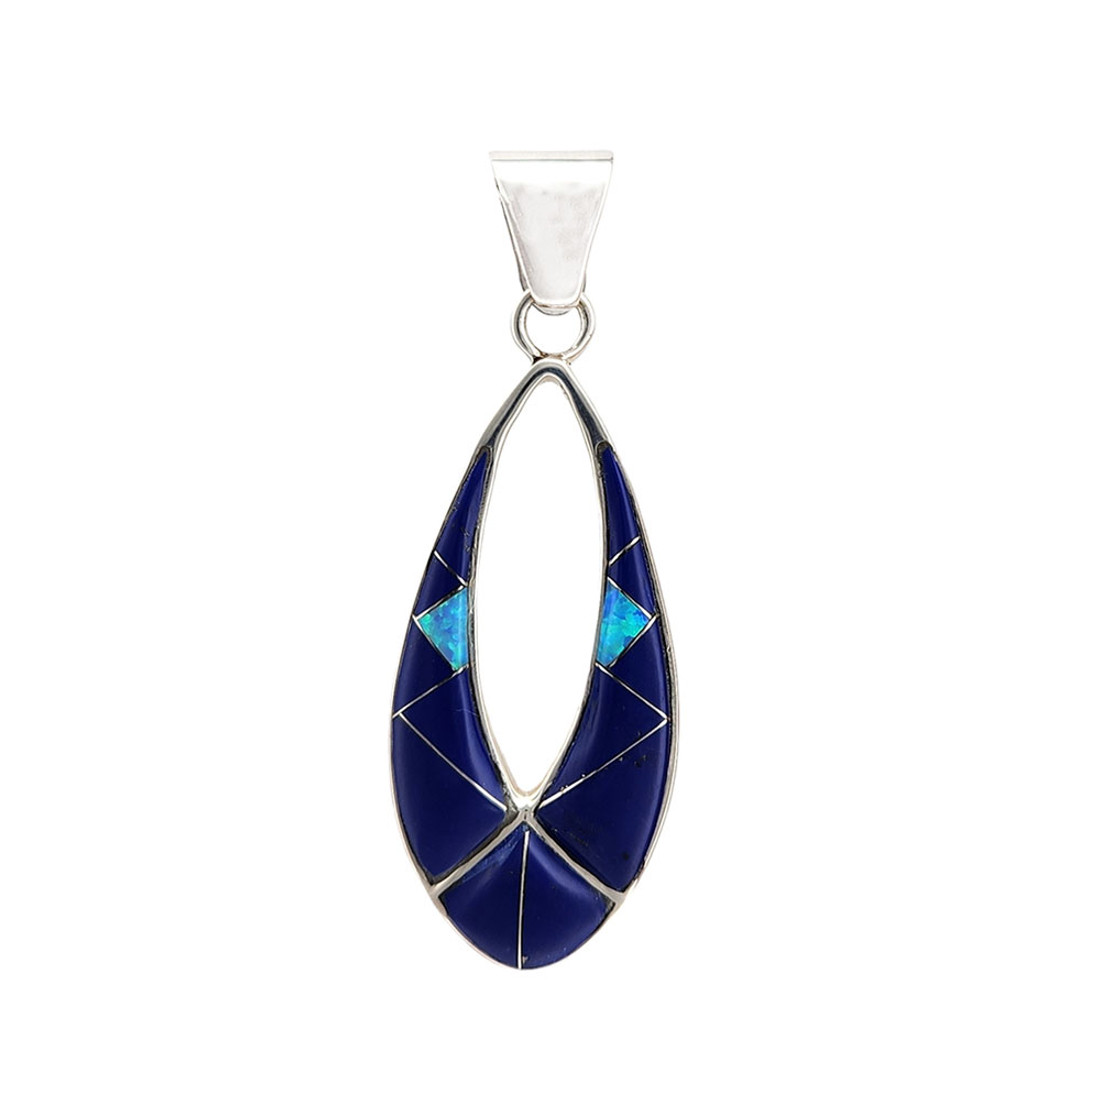 Lapis and Opal inlaid sterling silver pendant. 